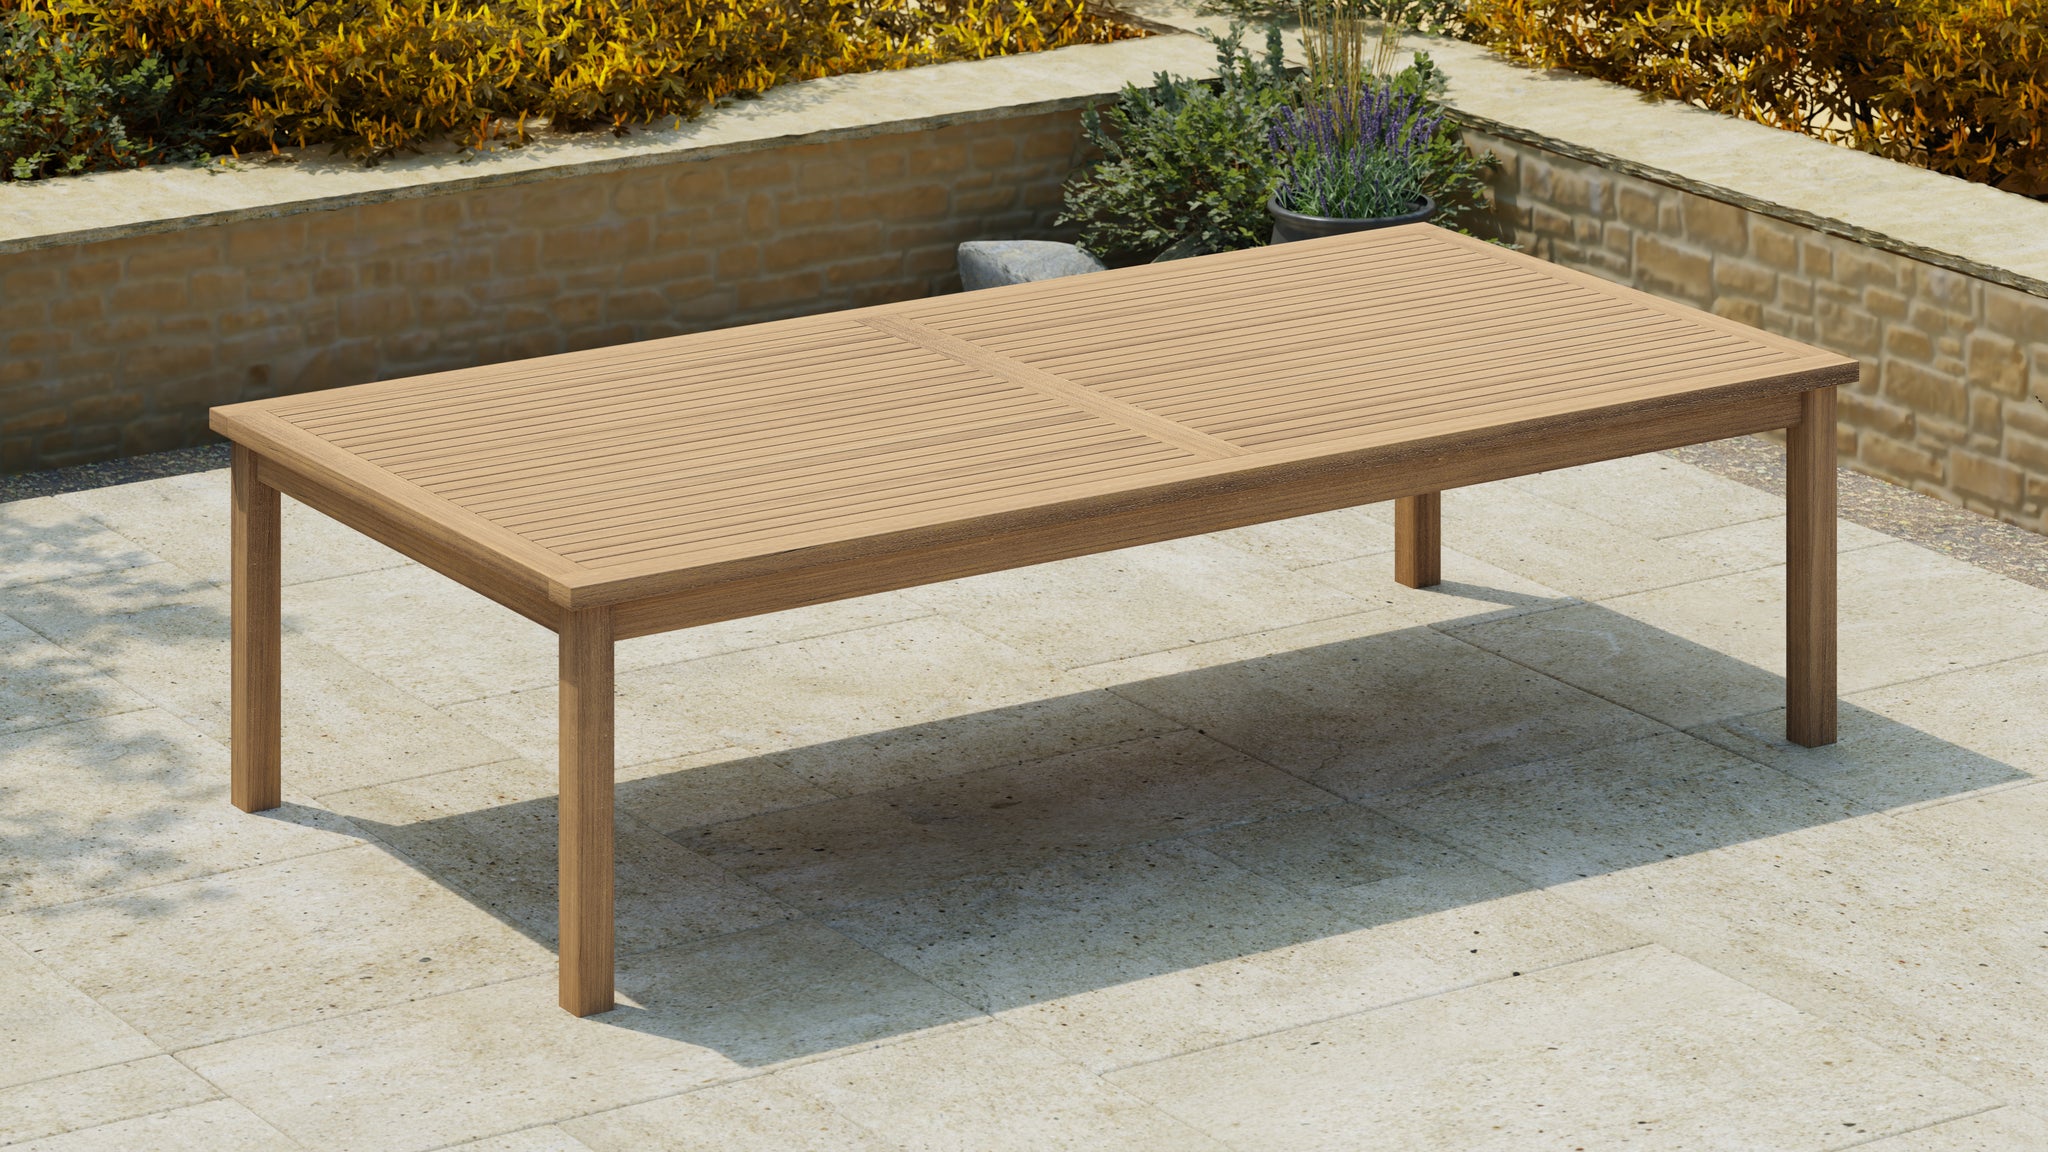 140x280cm Fixed Rectangular Table without Parasol Hole